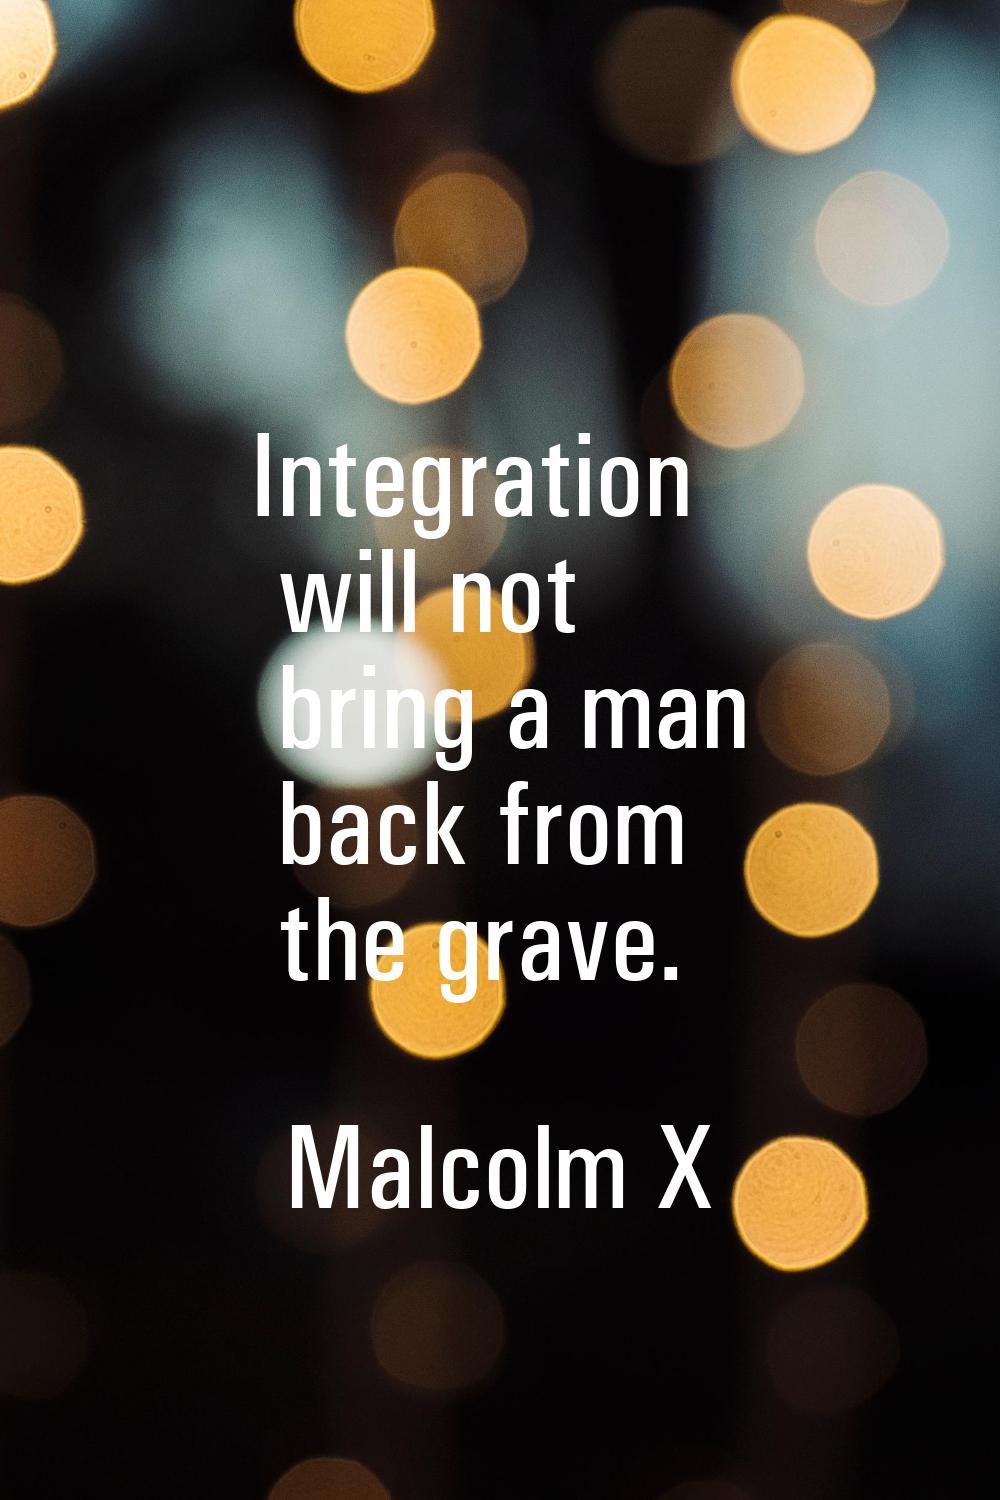 Integration will not bring a man back from the grave.